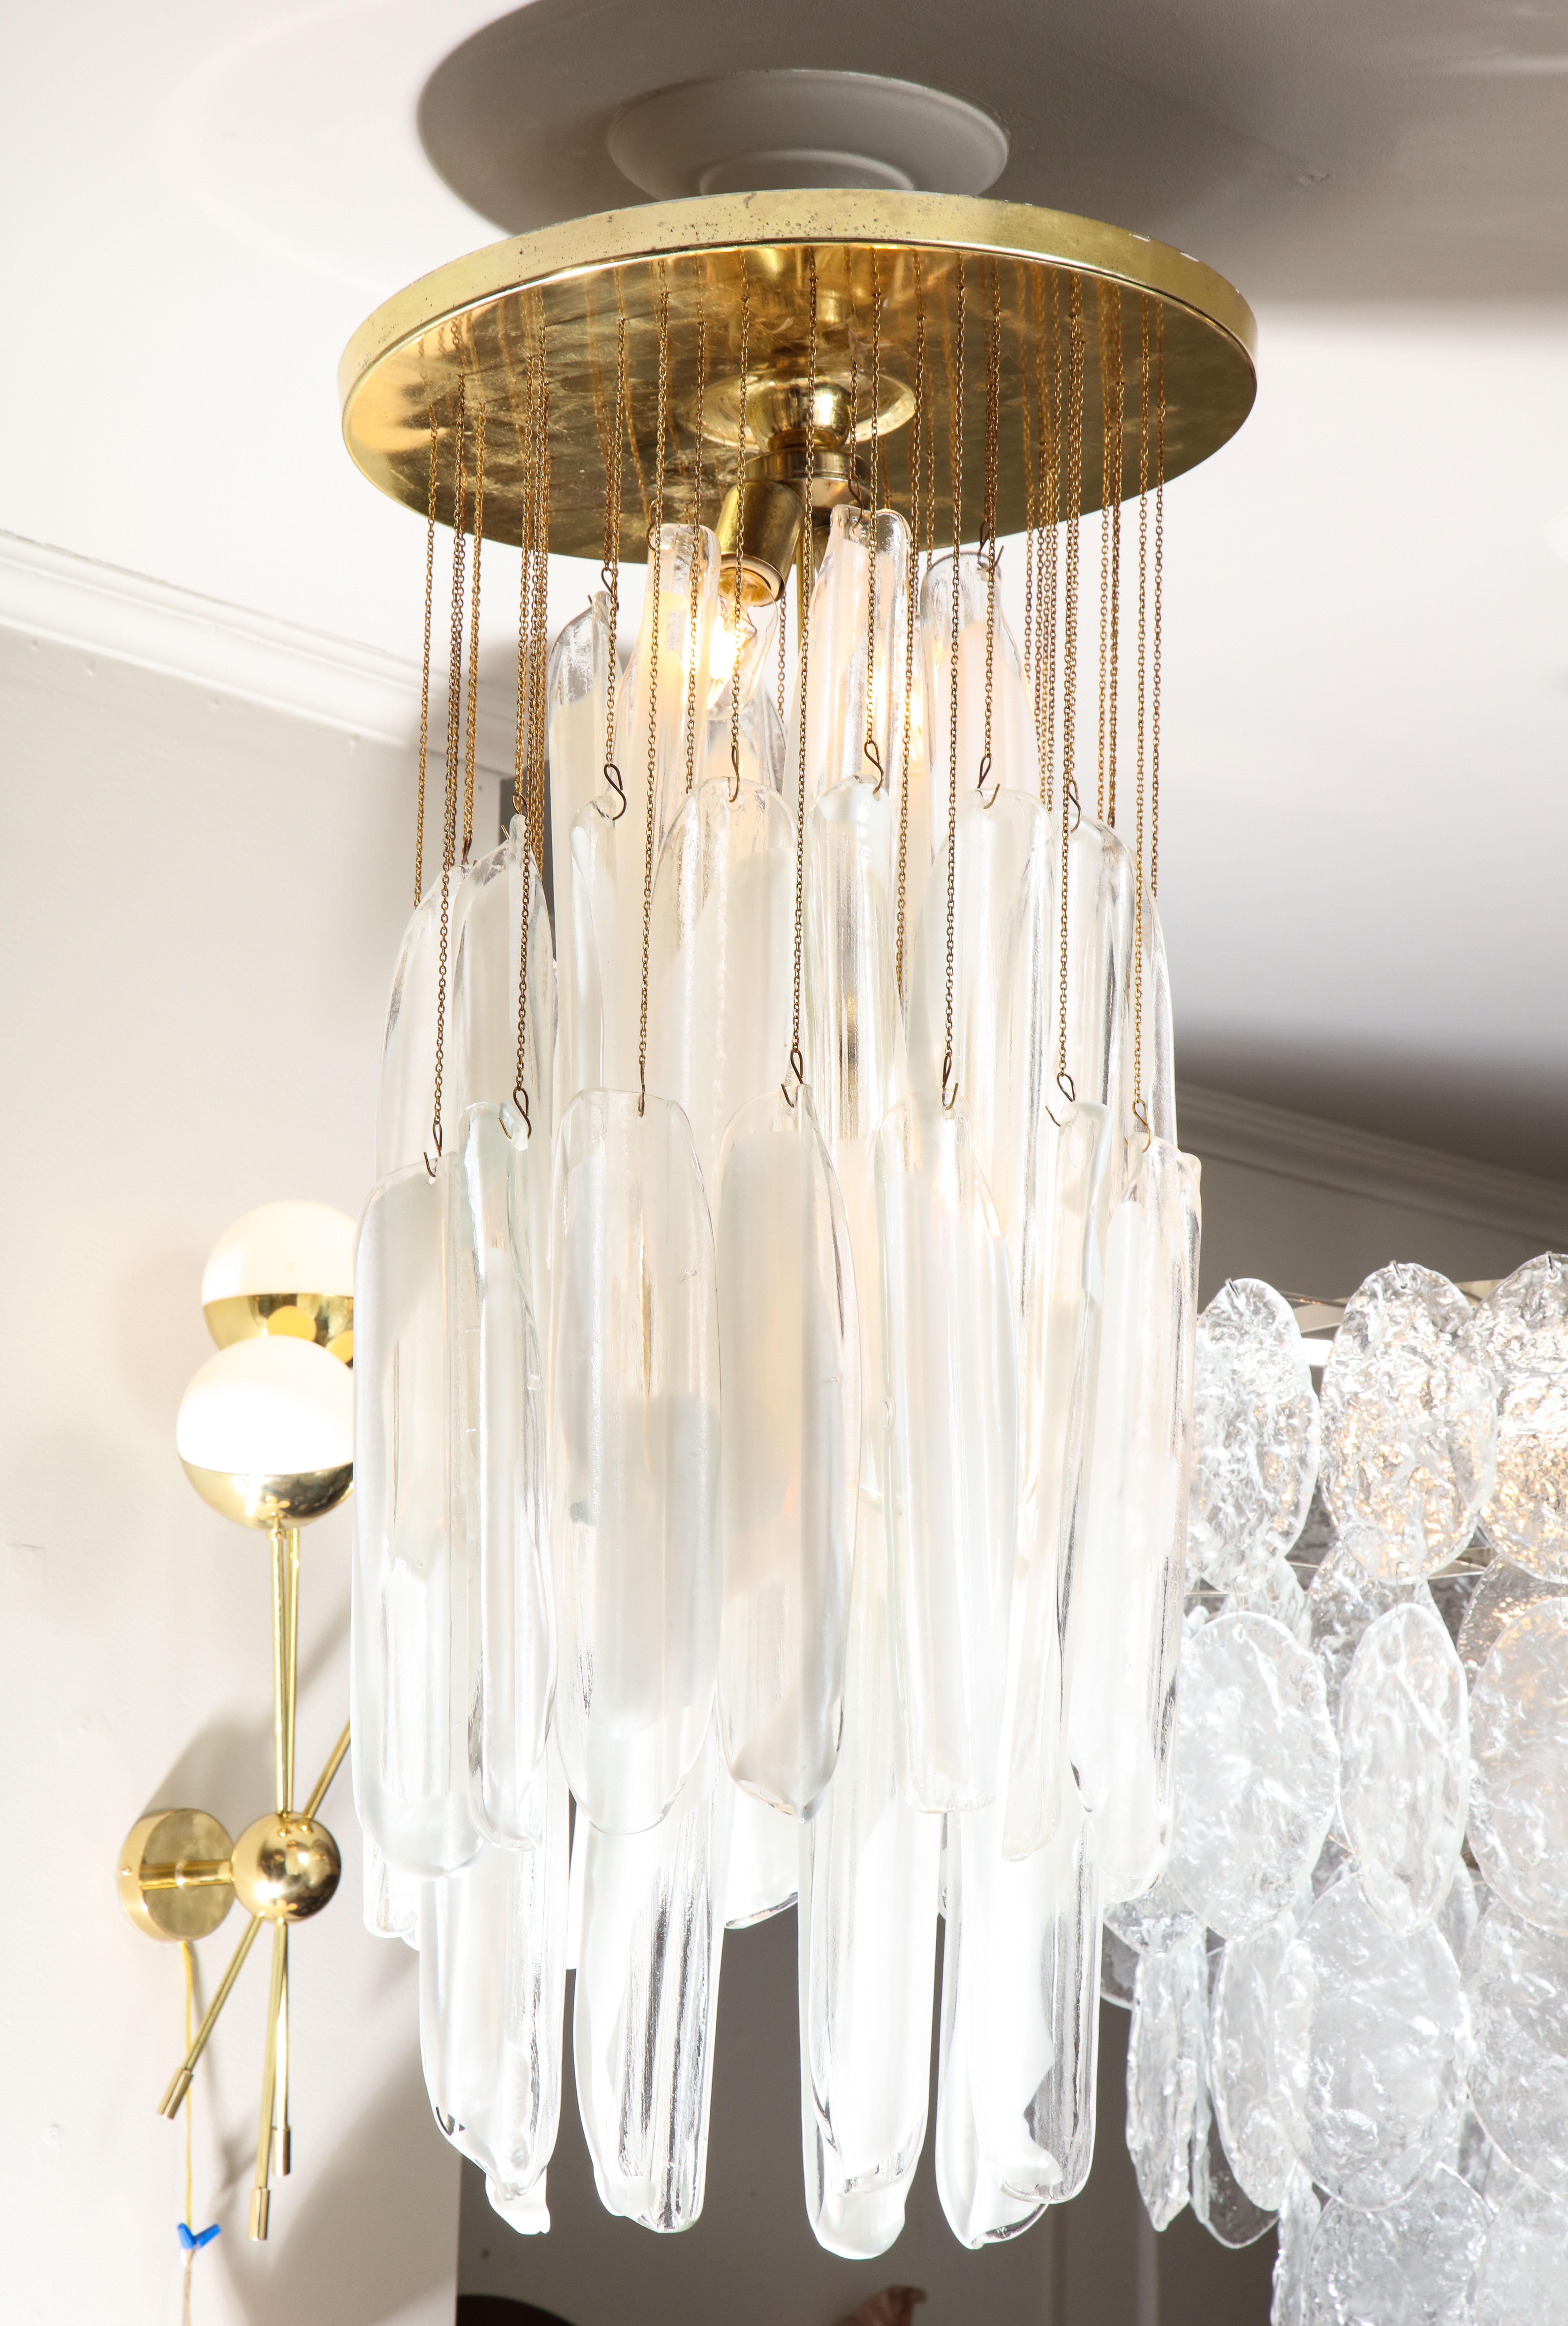 Elegant Mazzega glass chandelier with clear and white oblong leaf glass, designed by Mazzega in 1960's. Each piece has a unique stream of white stripe on clear glass that was created with exceptional technique used by a glass artisans in Murano,